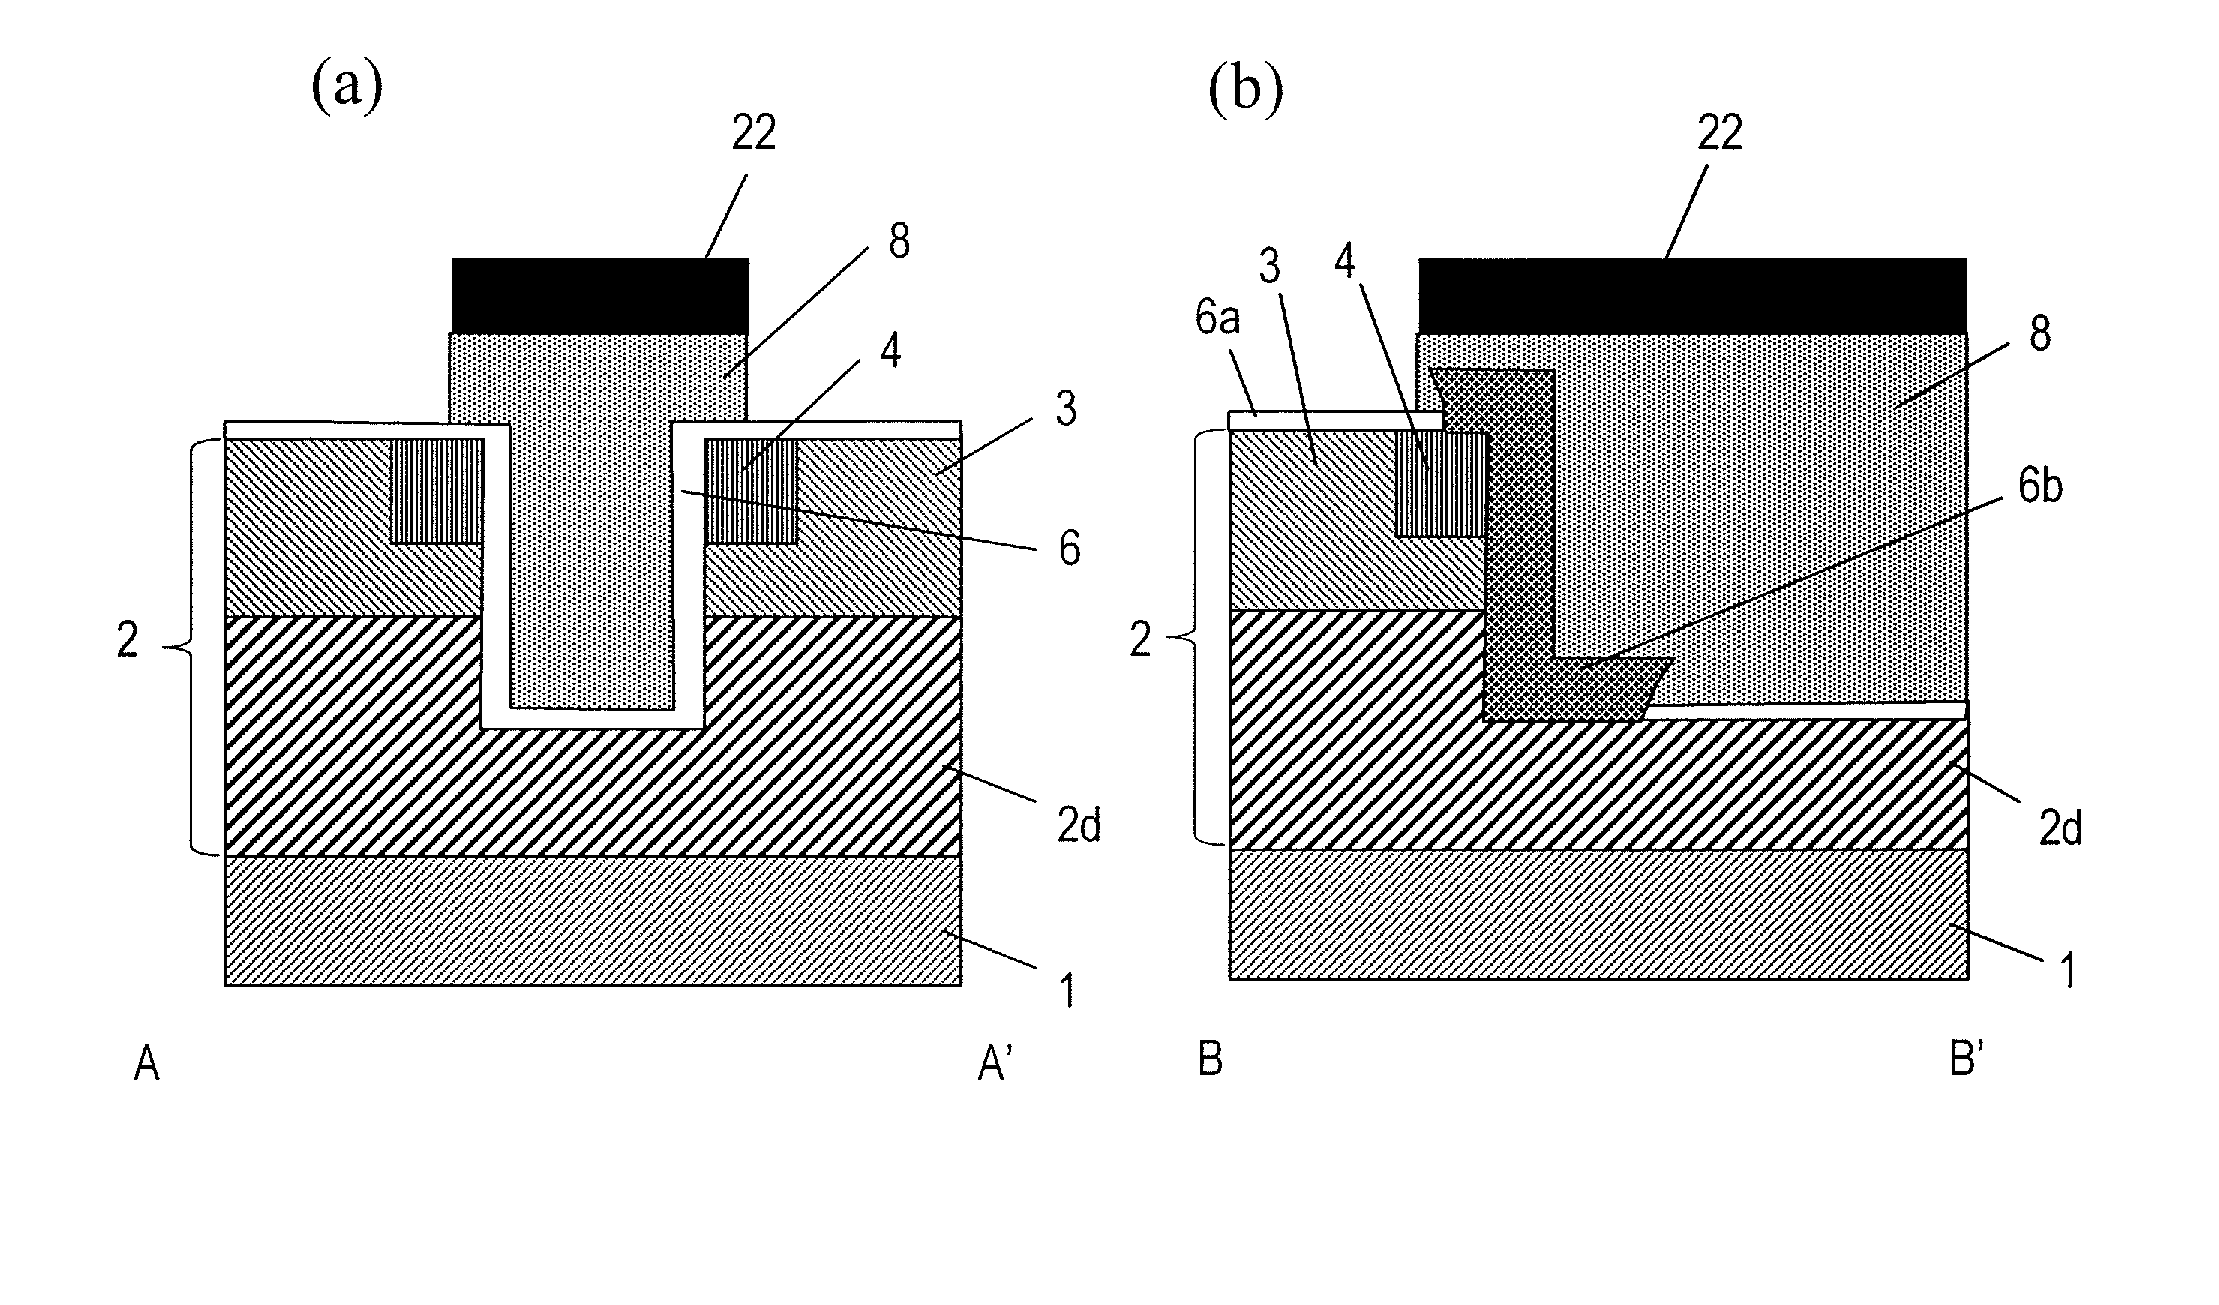 Semiconductor device and method for producing same